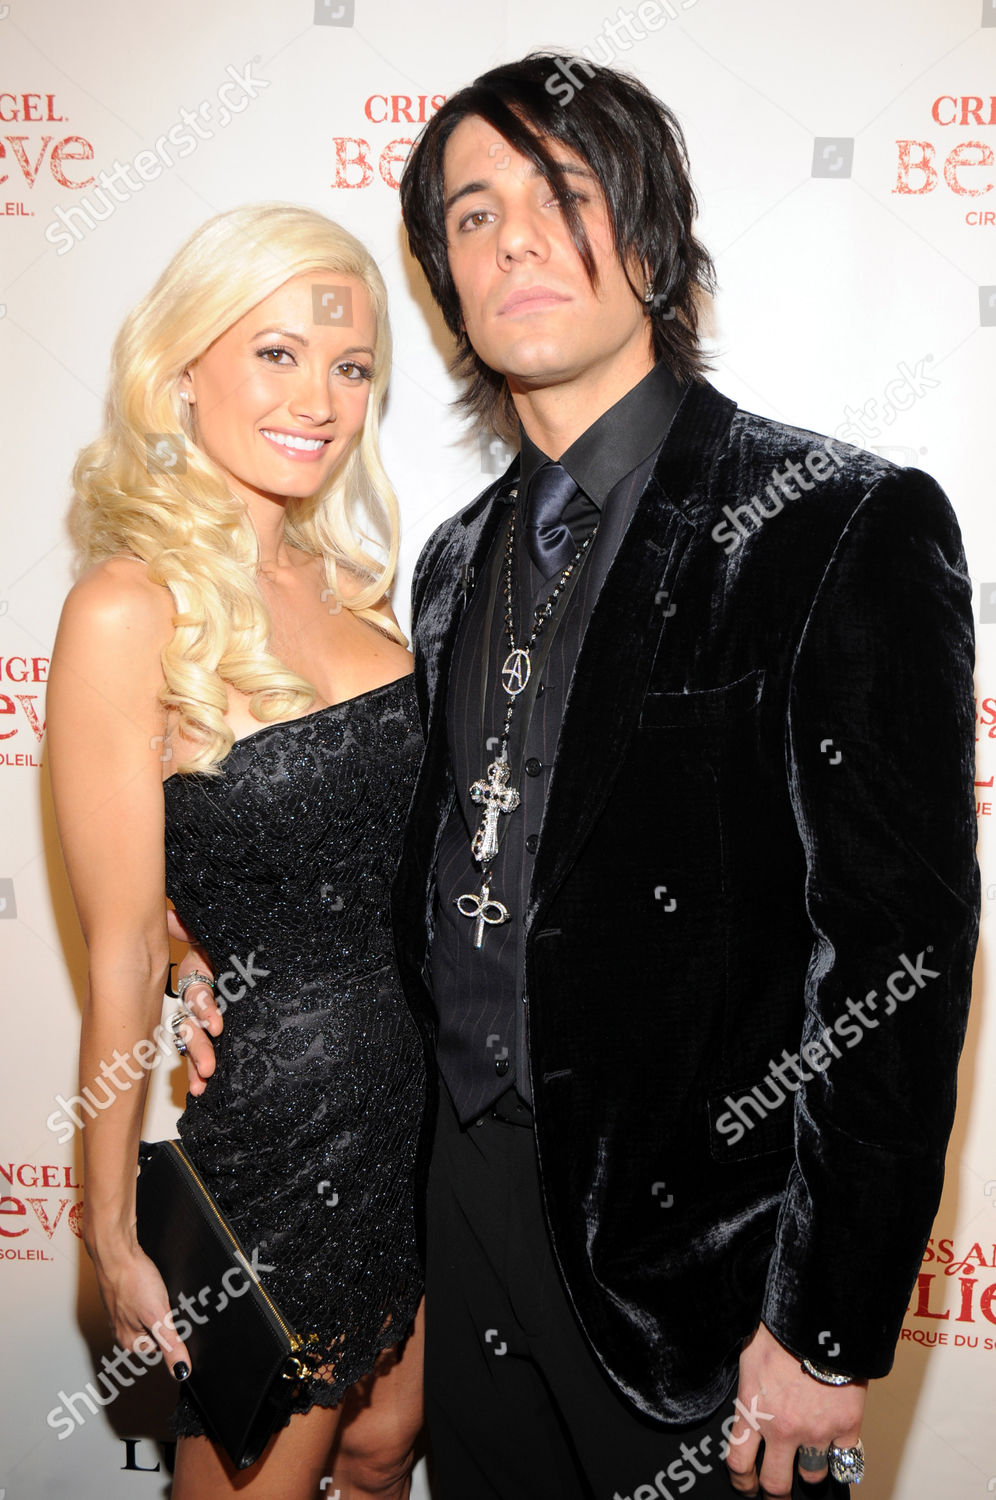 criss angel and holly